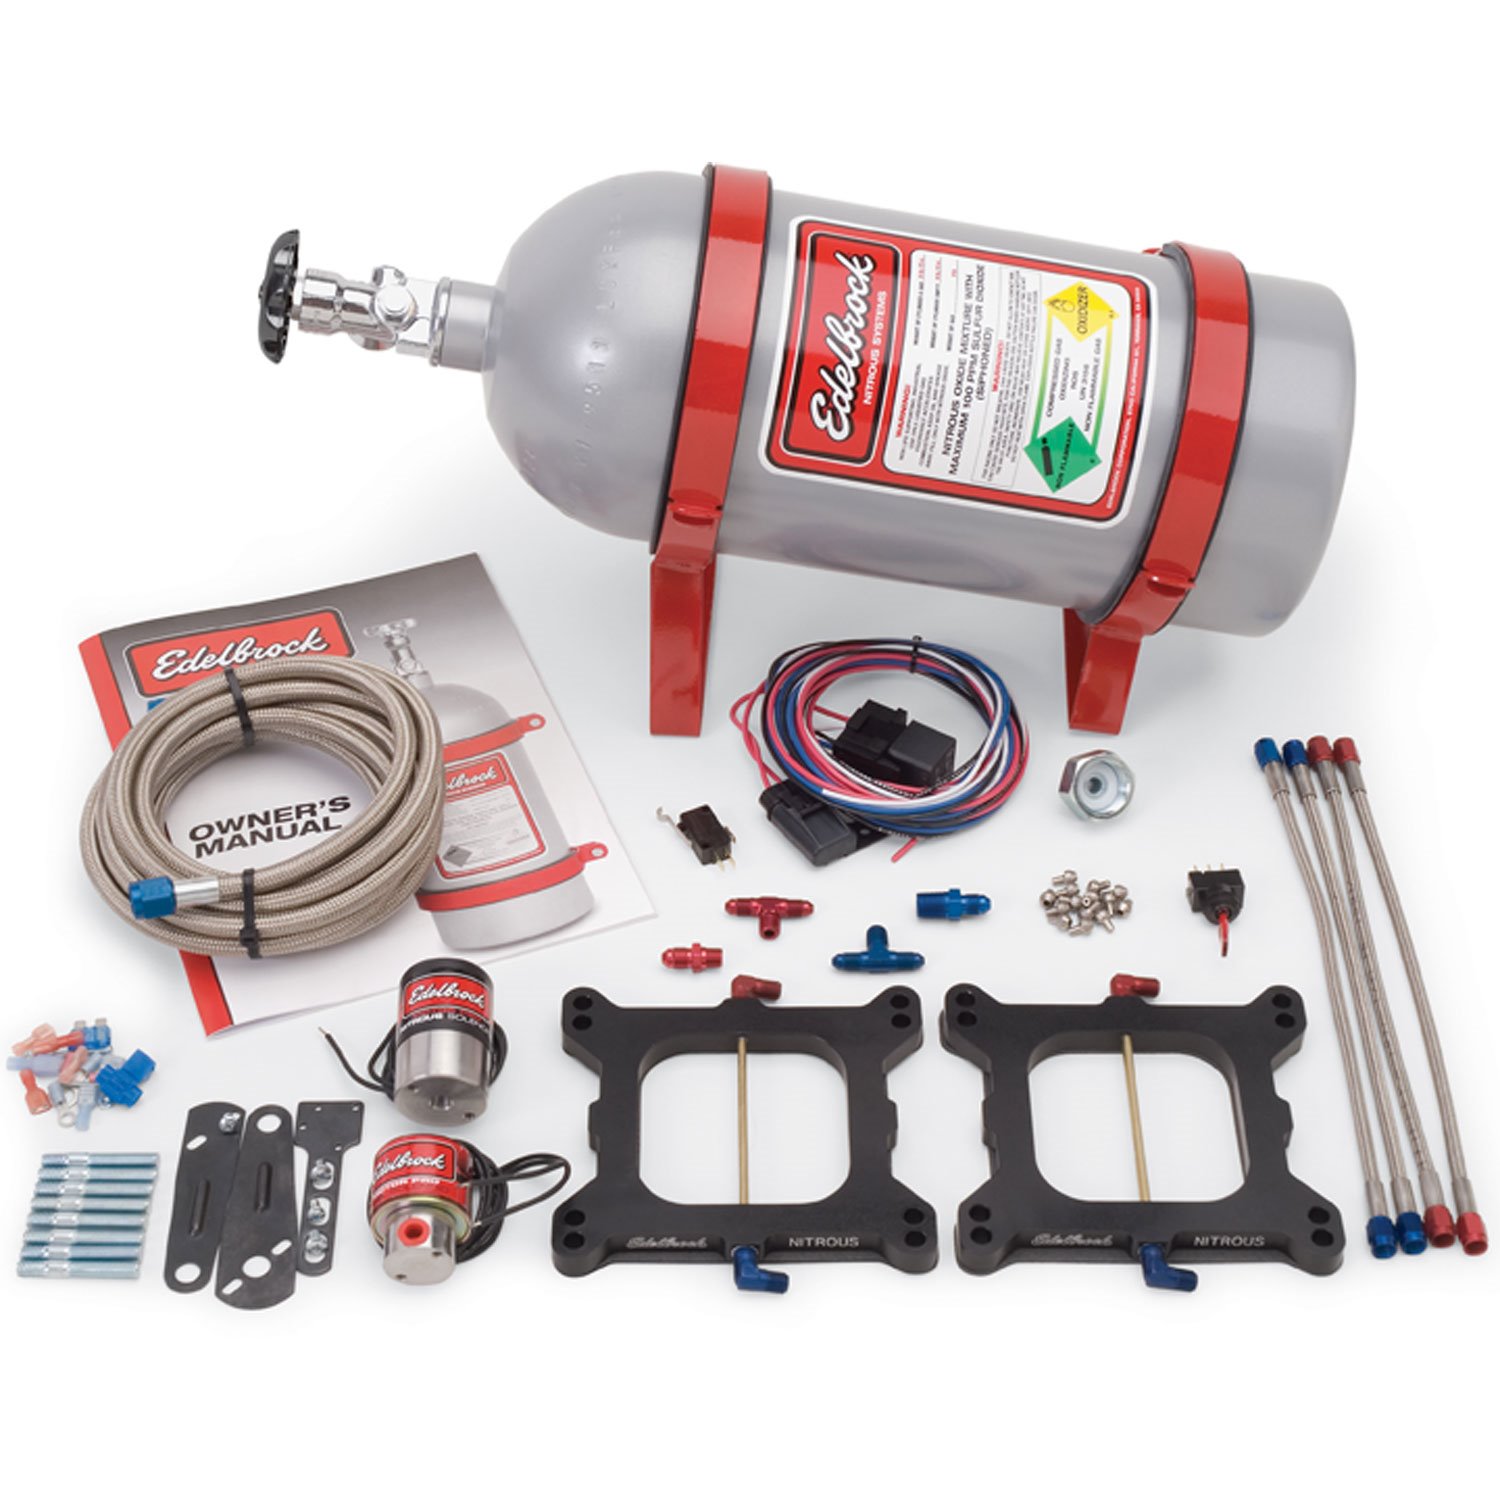 Performer RPM Dual-Quad Nitrous Kit for 4150 Square-bore Carburetor Flange with Silver Powder Coated Bottle